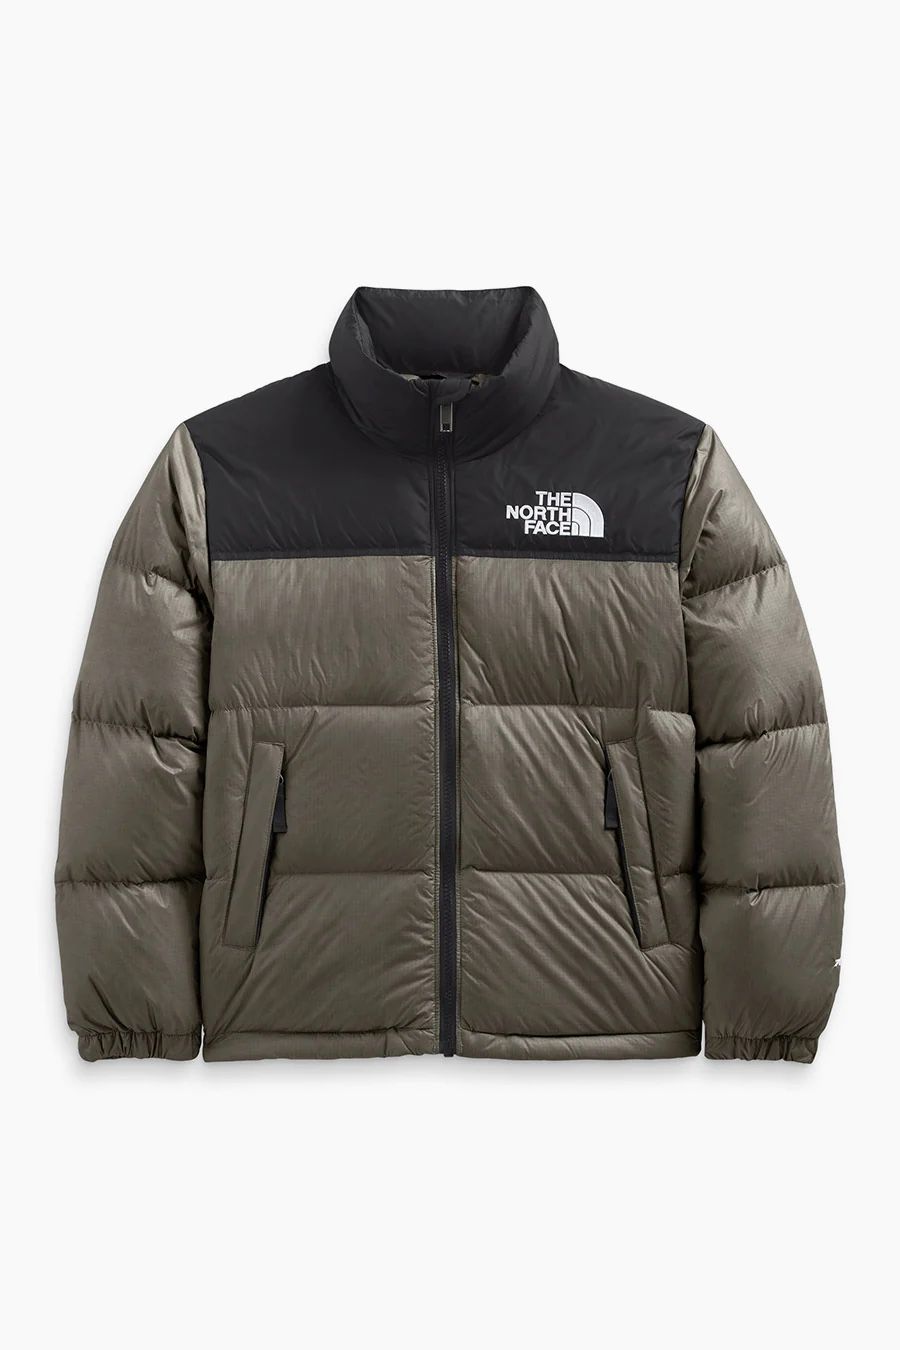 The North Face Jacket Kids